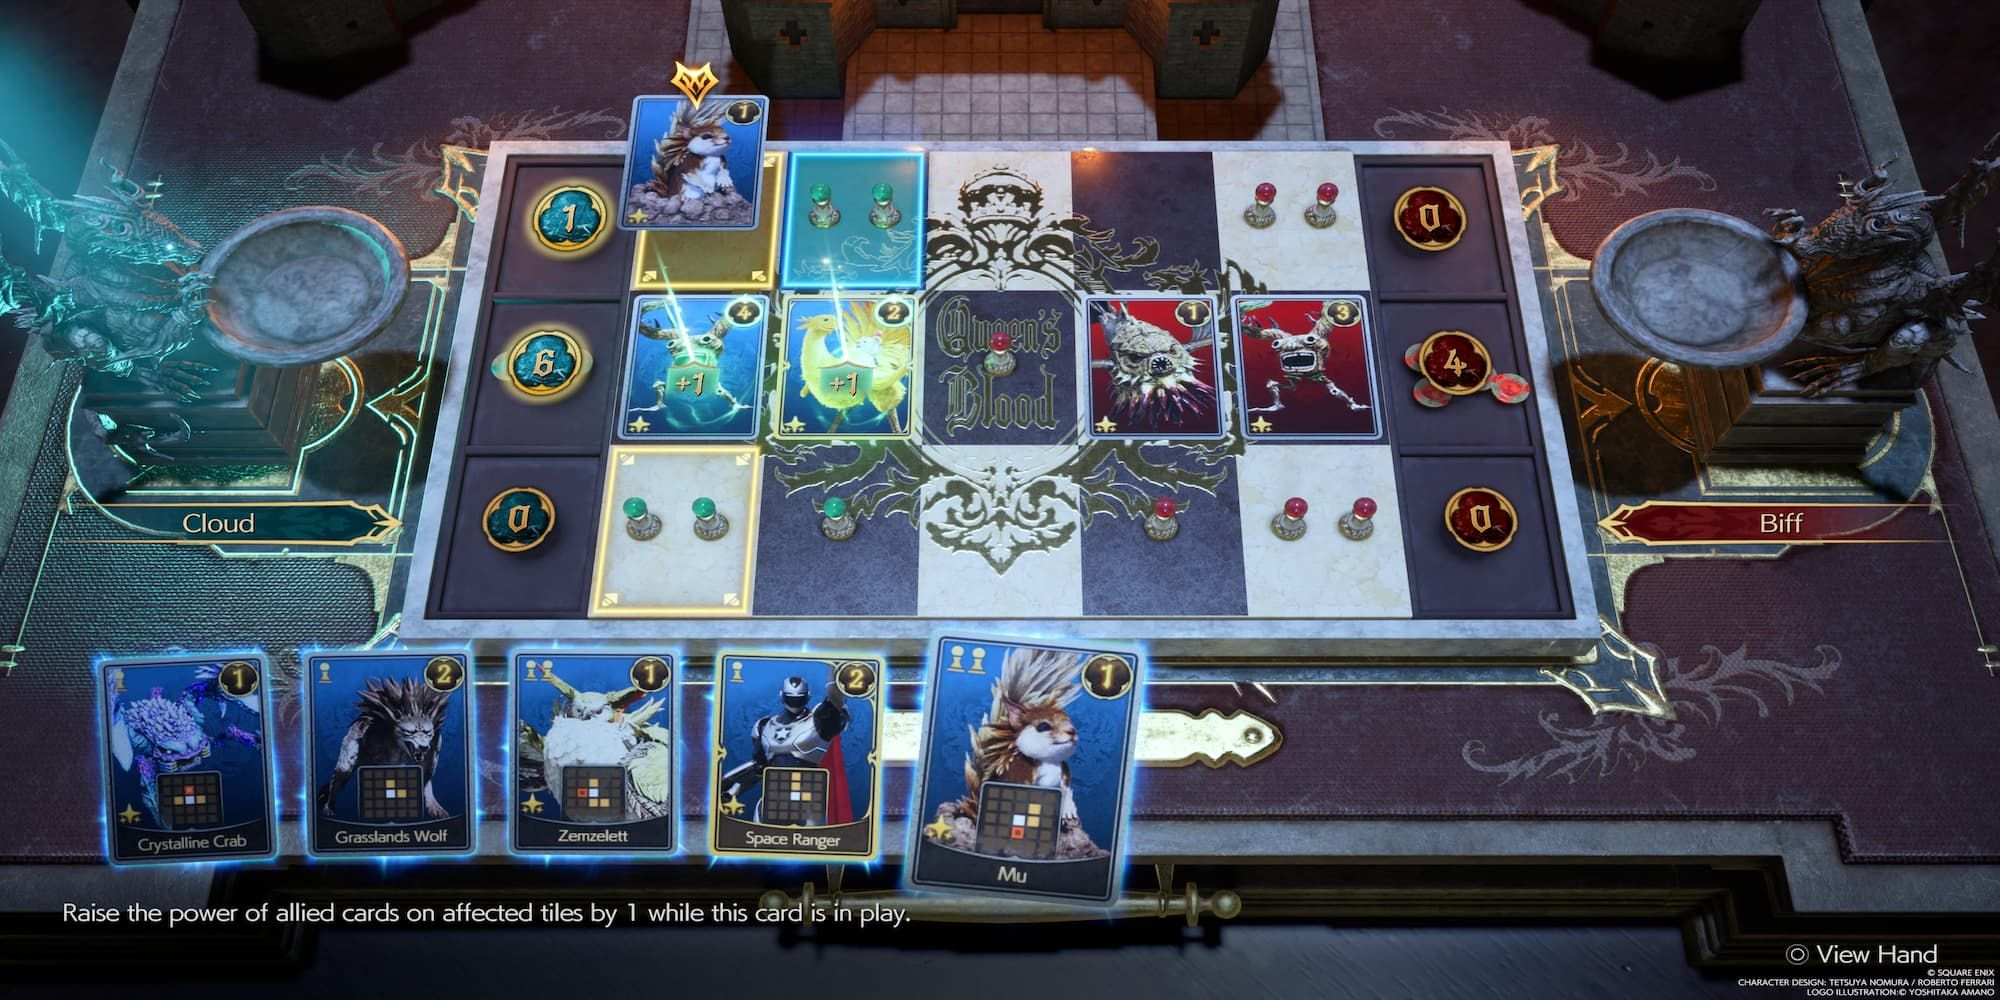 The Player Placing A Buff Card